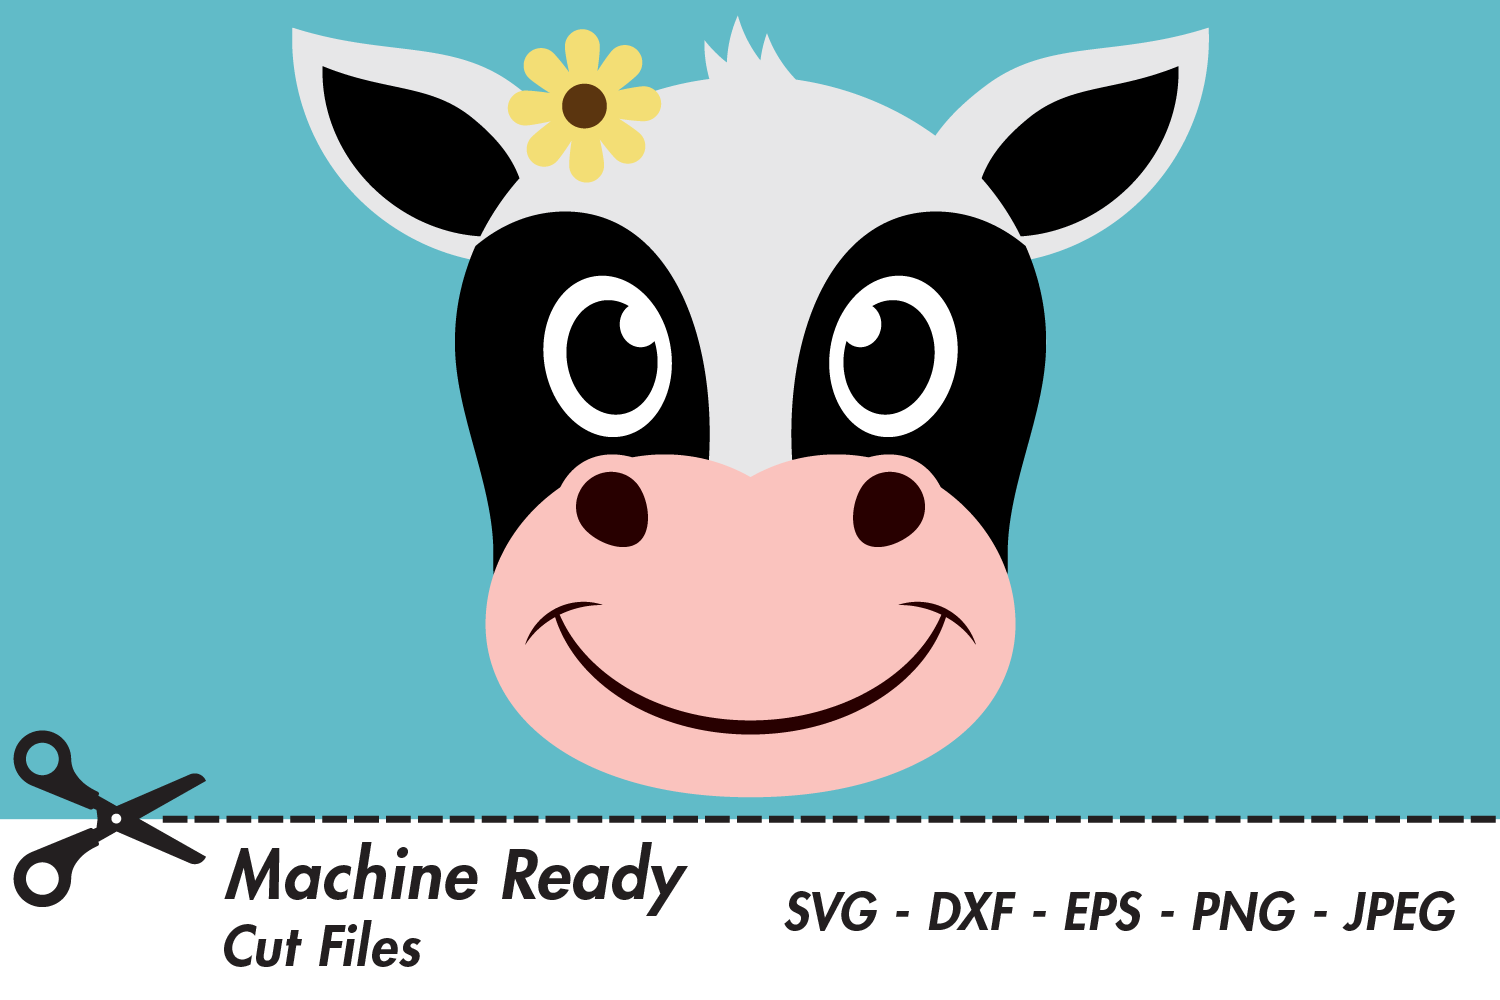 Download Cute Cow SVG Cut Files, Happy Farm Animal, Cow Face